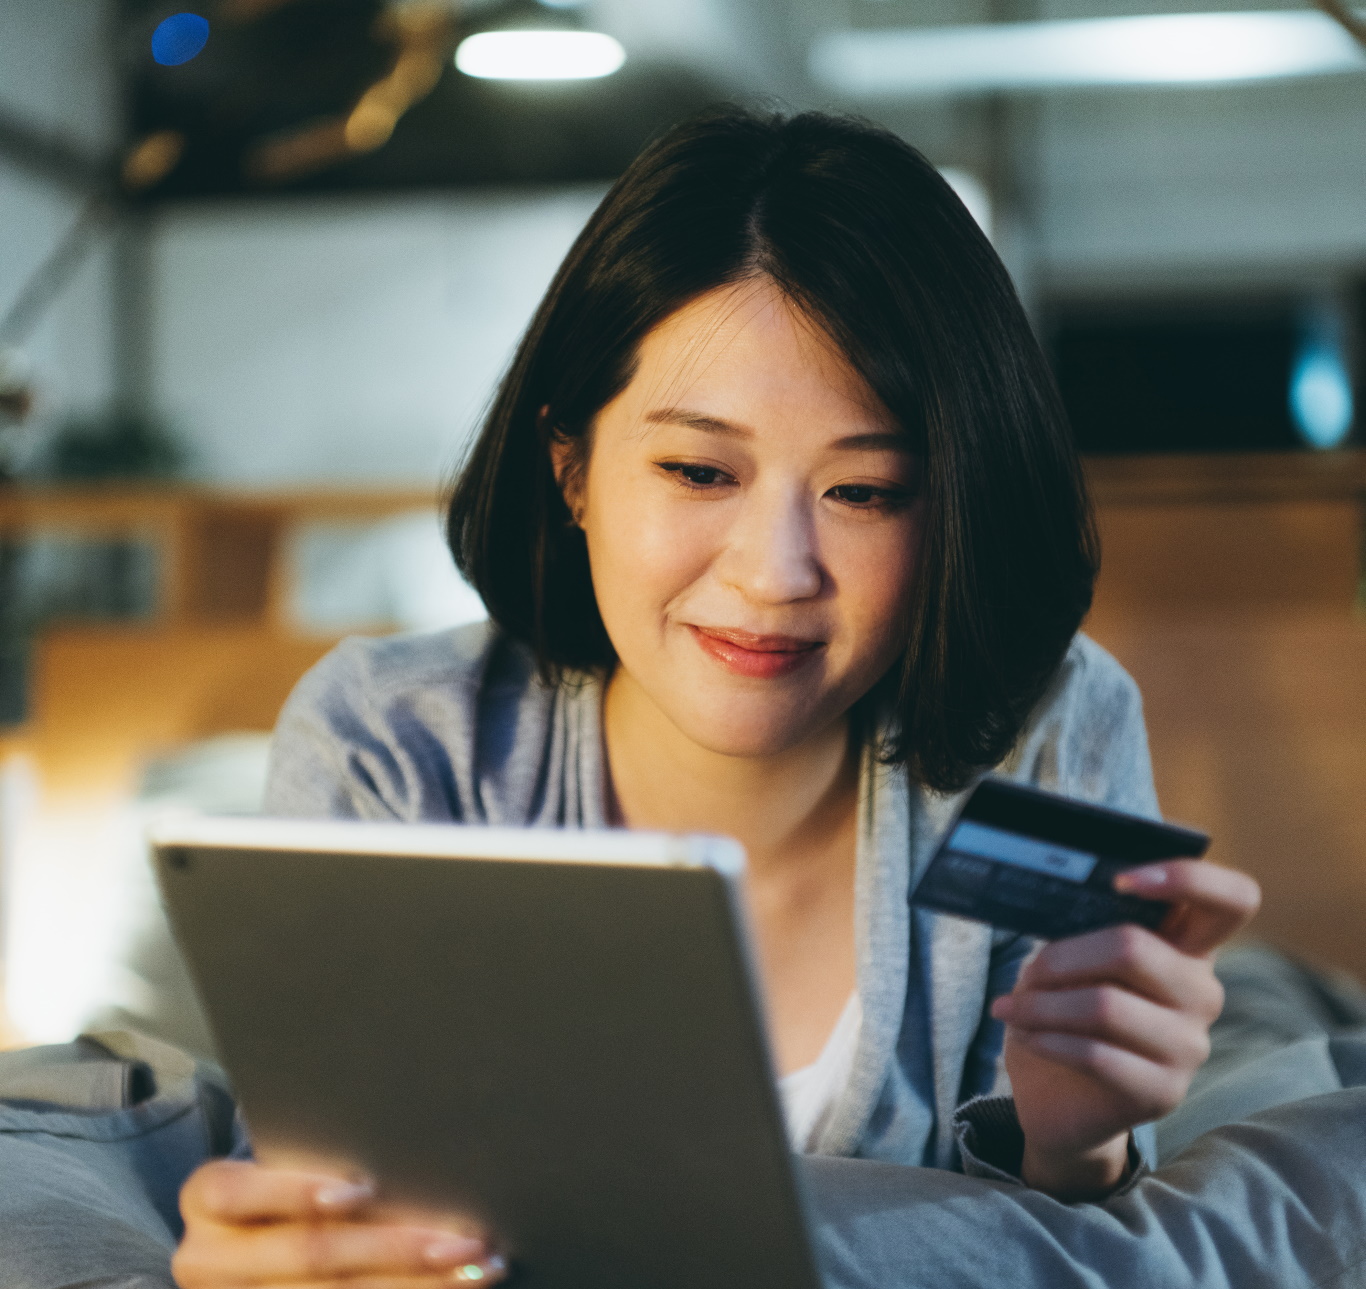 Managing your credit page. Be credit smart. Here are some tips to help keep your credit card spending in-check